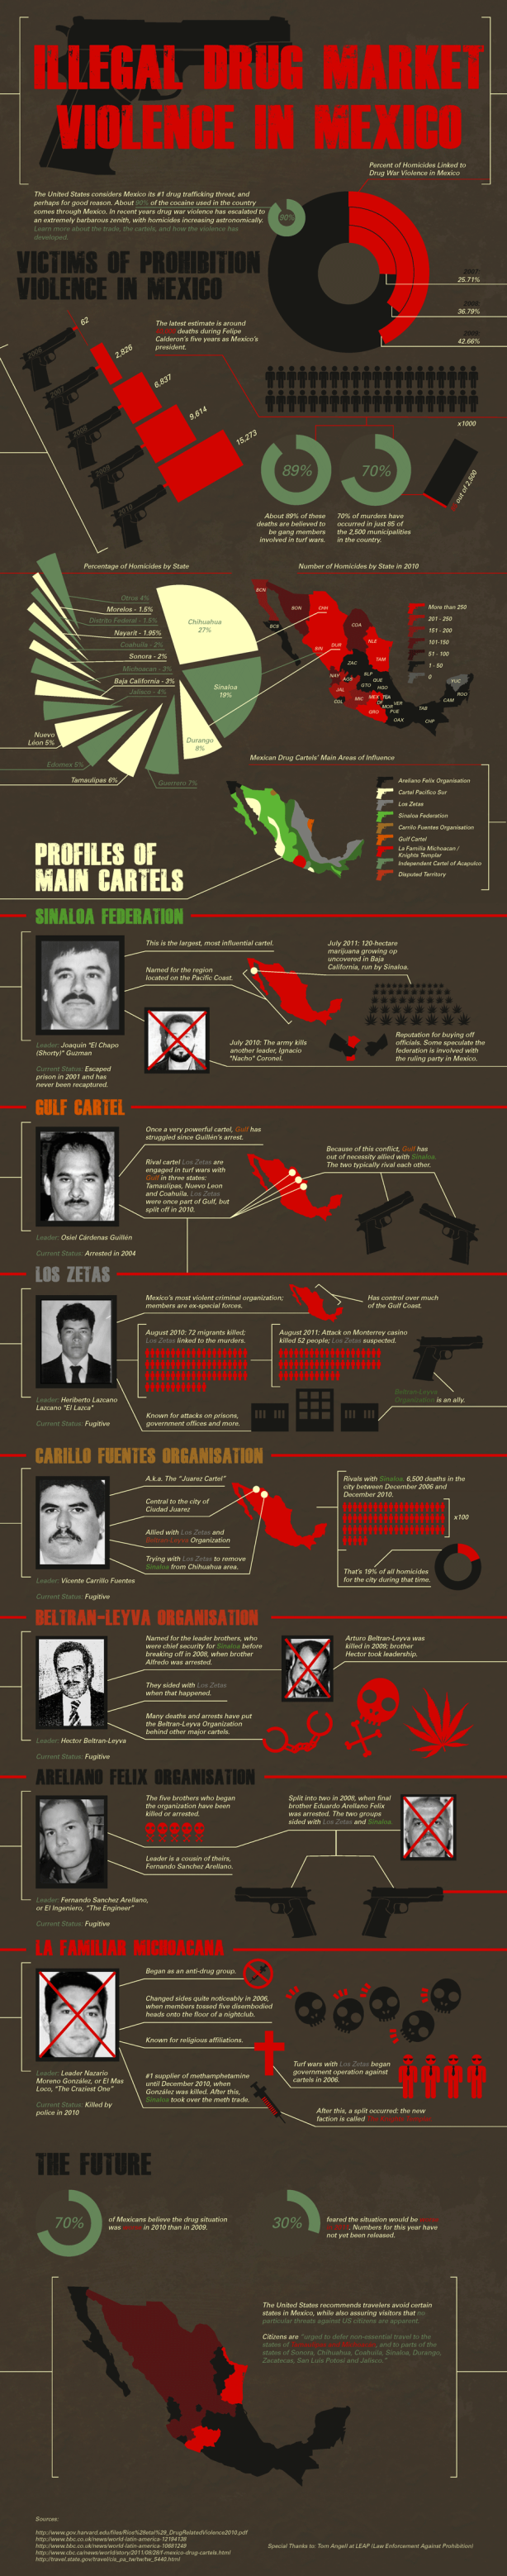 Mexico's drug war visualized